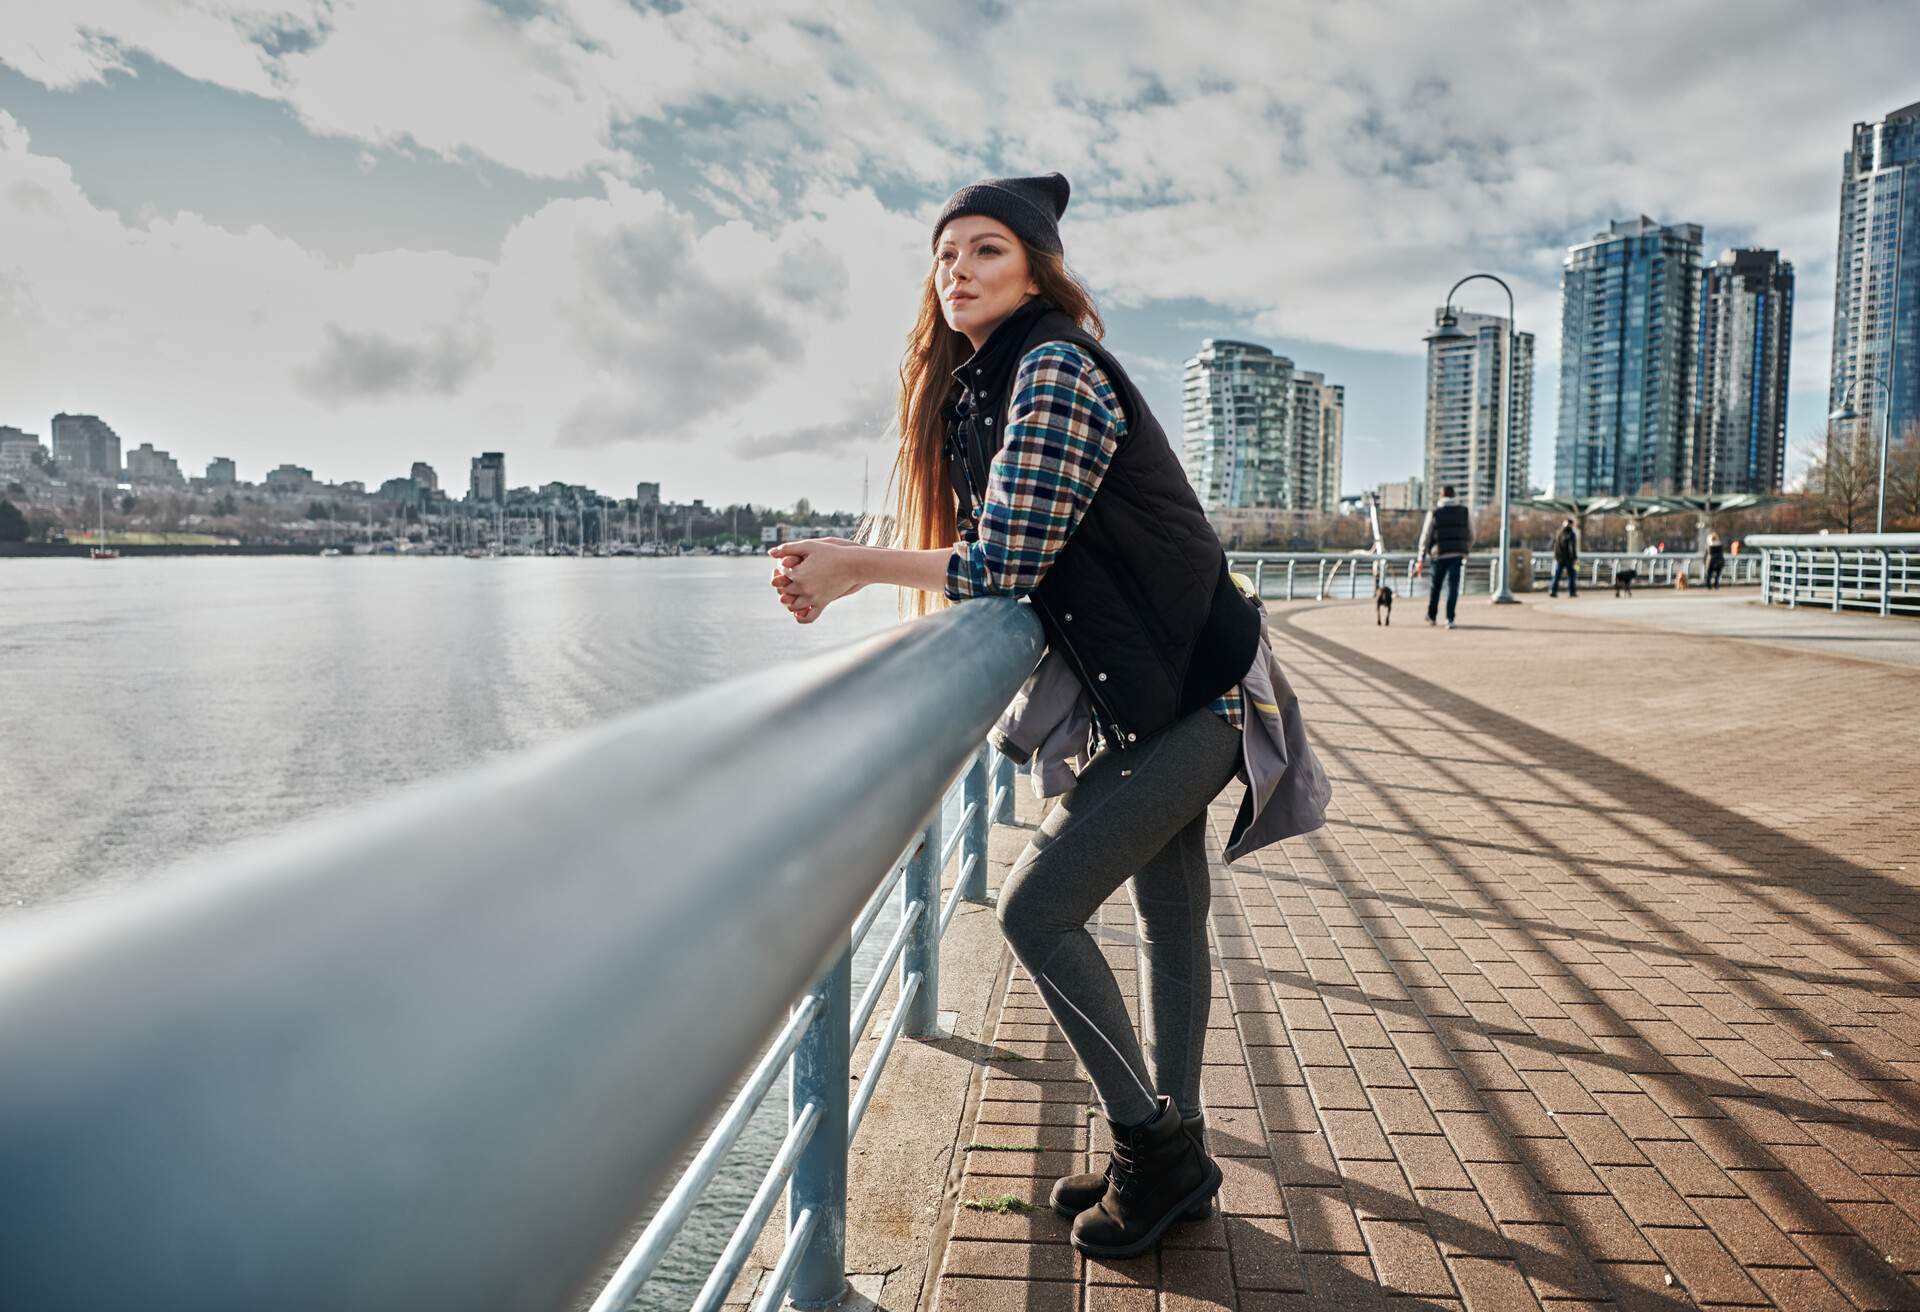 Shoot of young woman enjoying Vancouver during the autumn